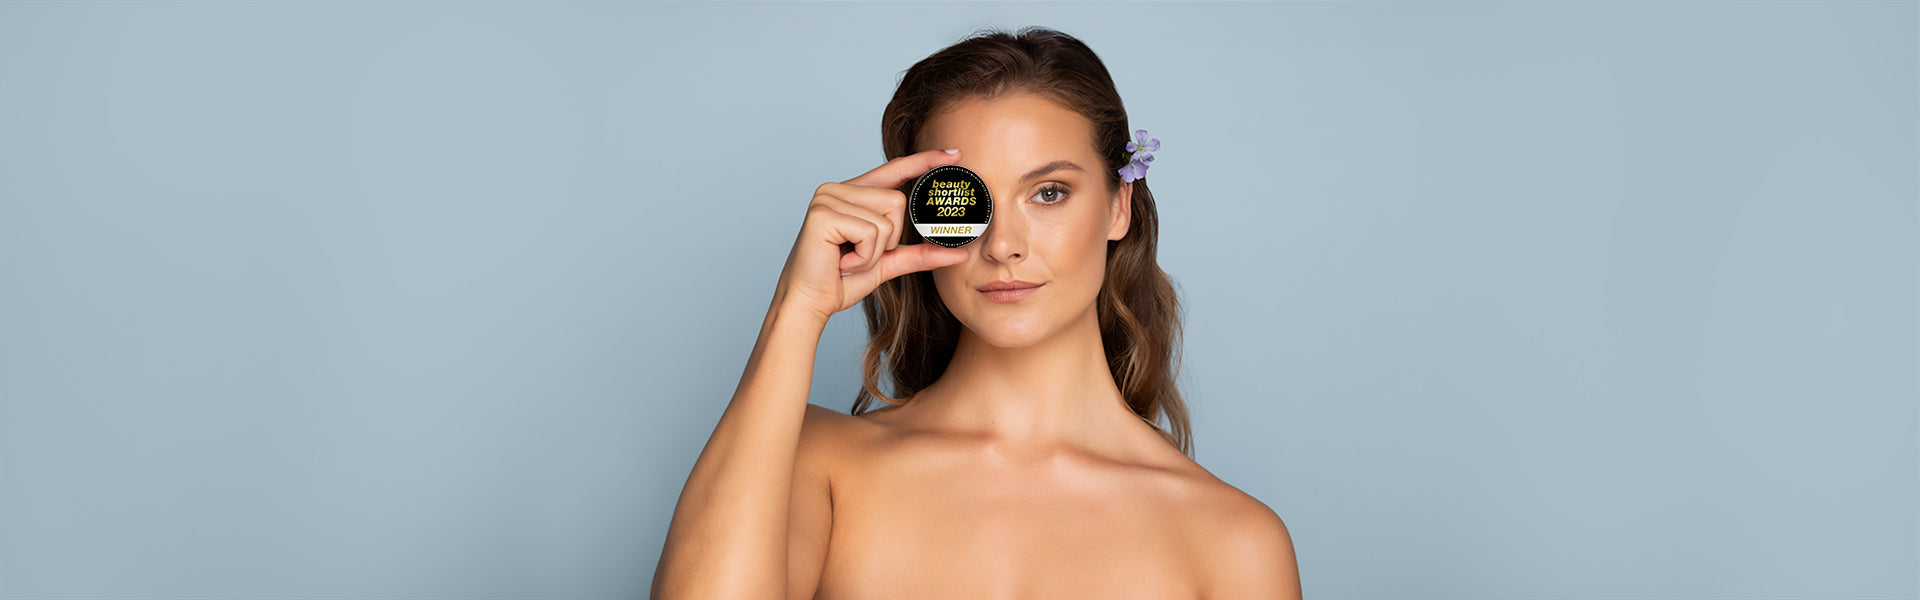 Woman holds beauty shortlist award badge up to her eye